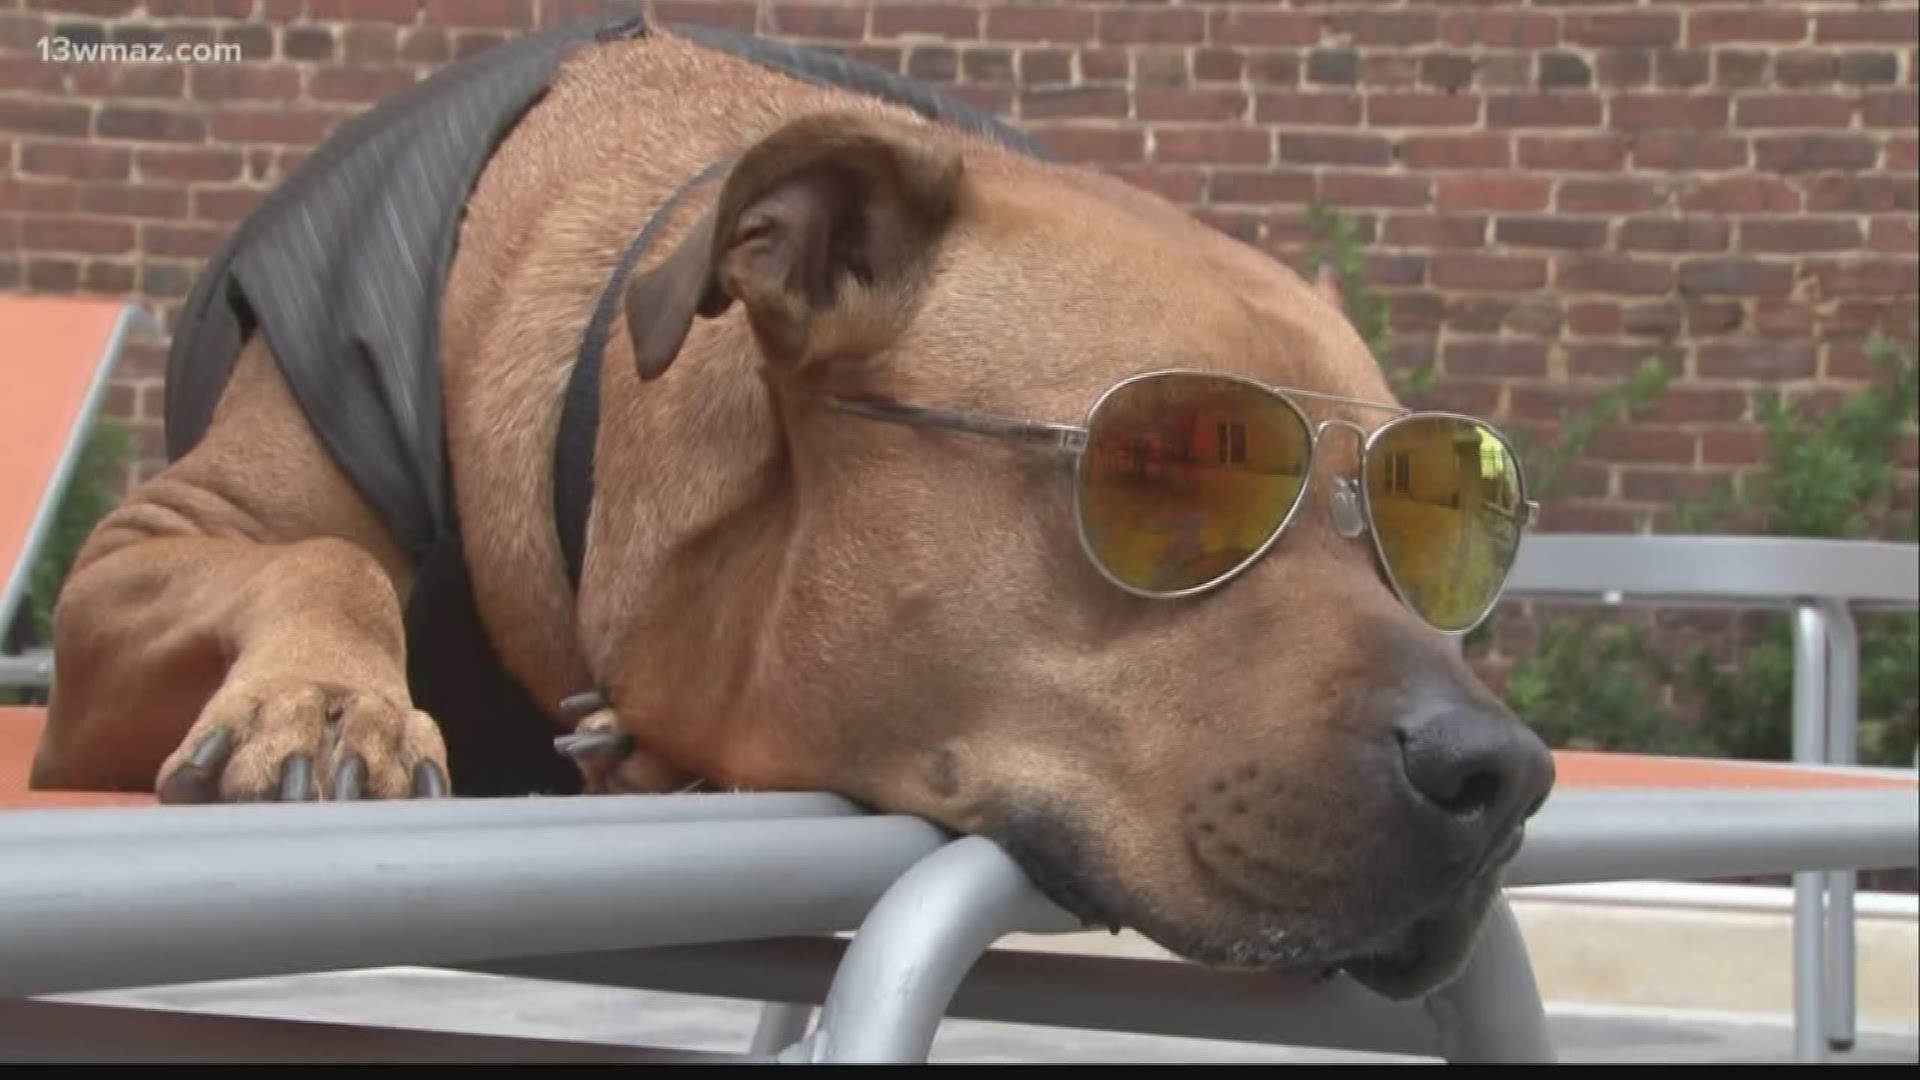 The dog's owner designed the glasses to keep sand out of the dog's eyes back when they lived in Florida. The sunglasses protect from UV light and prevent cataracts.